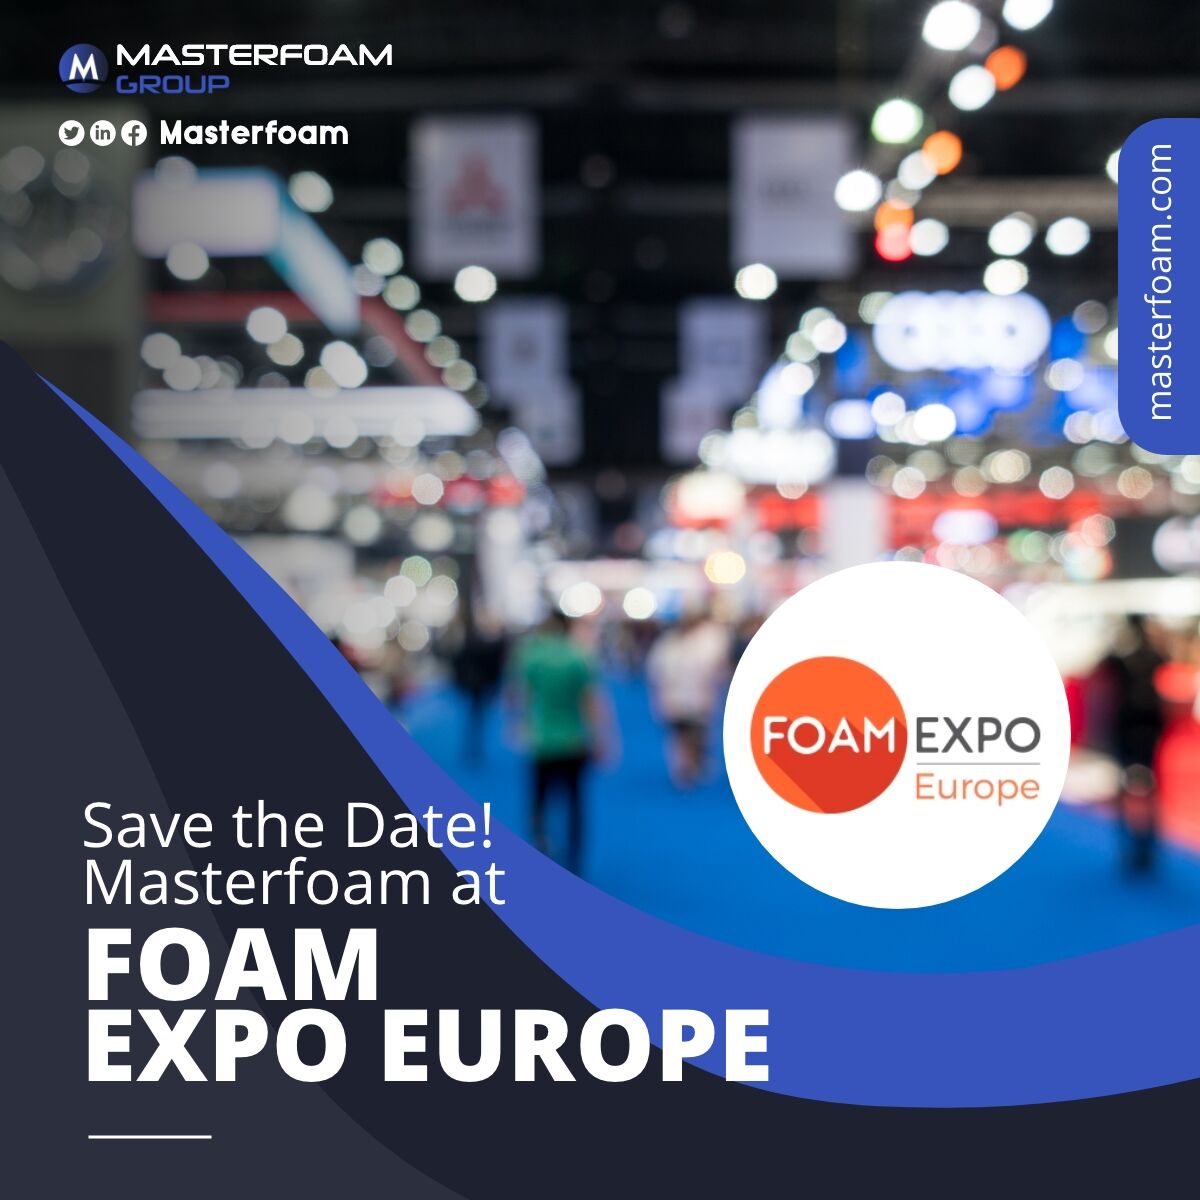 Save the Date! Masterfoam at Foam Expo Europe